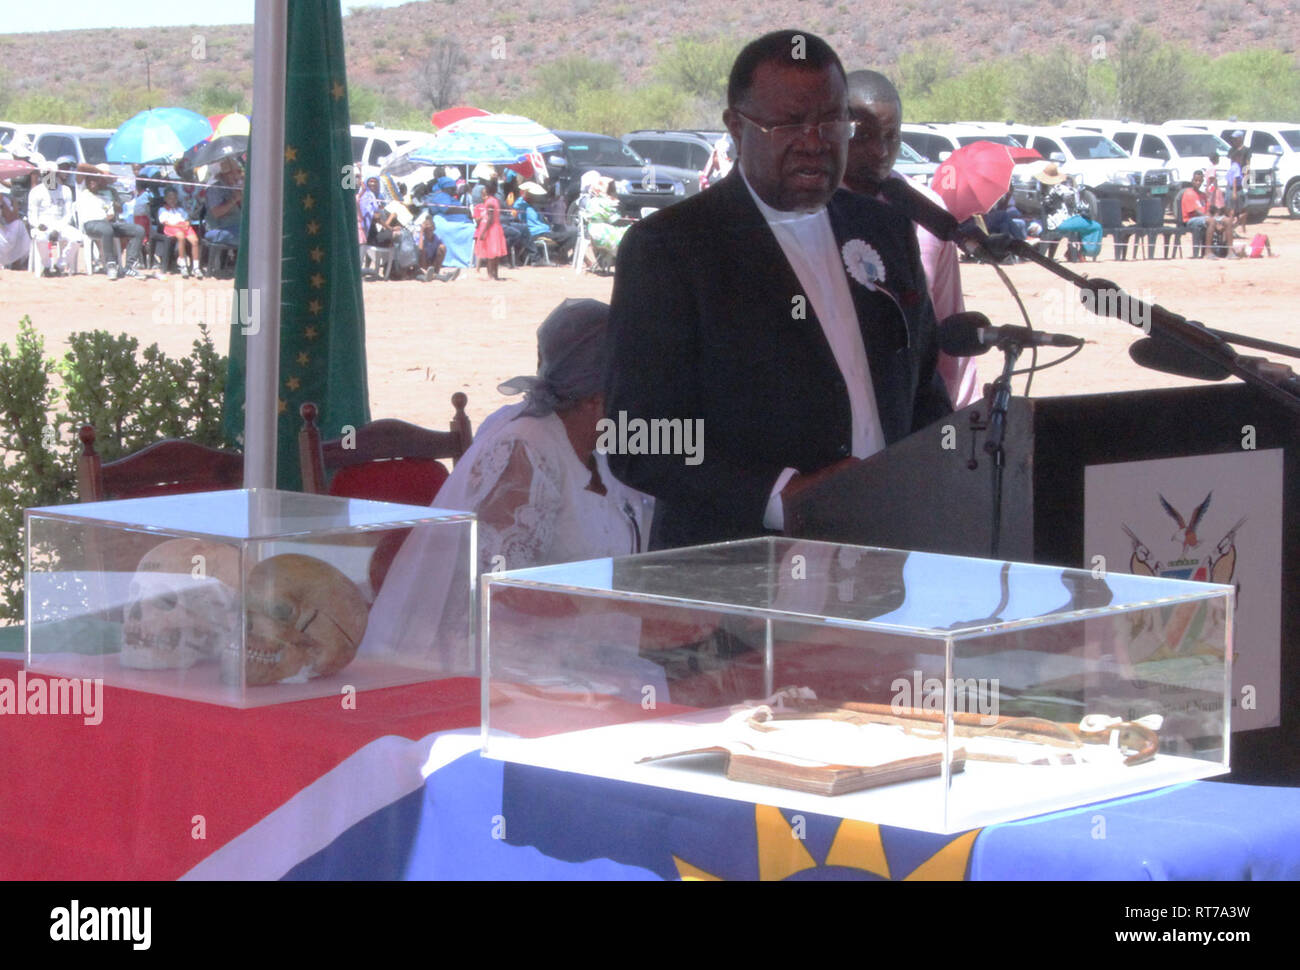 HANDOUT - 28 February 2019, Namibia, Gibeon: Namibia's head of state Hage Geingob speaks at the handover of cultural assets stolen during colonial times. The two objects, a whip and a Bible, belonged to Hendrik Witbooi, a leader of the Nama people and Namibian national hero. So far they have been stored in the Linden Museum in Stuttgart. (to dpa "Baden-Württemberg gives important cultural assets back to Namibia" from 28.02.2019) Photo: Frank Steffen/Allgemeine Zeitung Namibia/dpa - ATTENTION: Only for editorial use in connection with the current reporting and only with complete mention of the Stock Photo